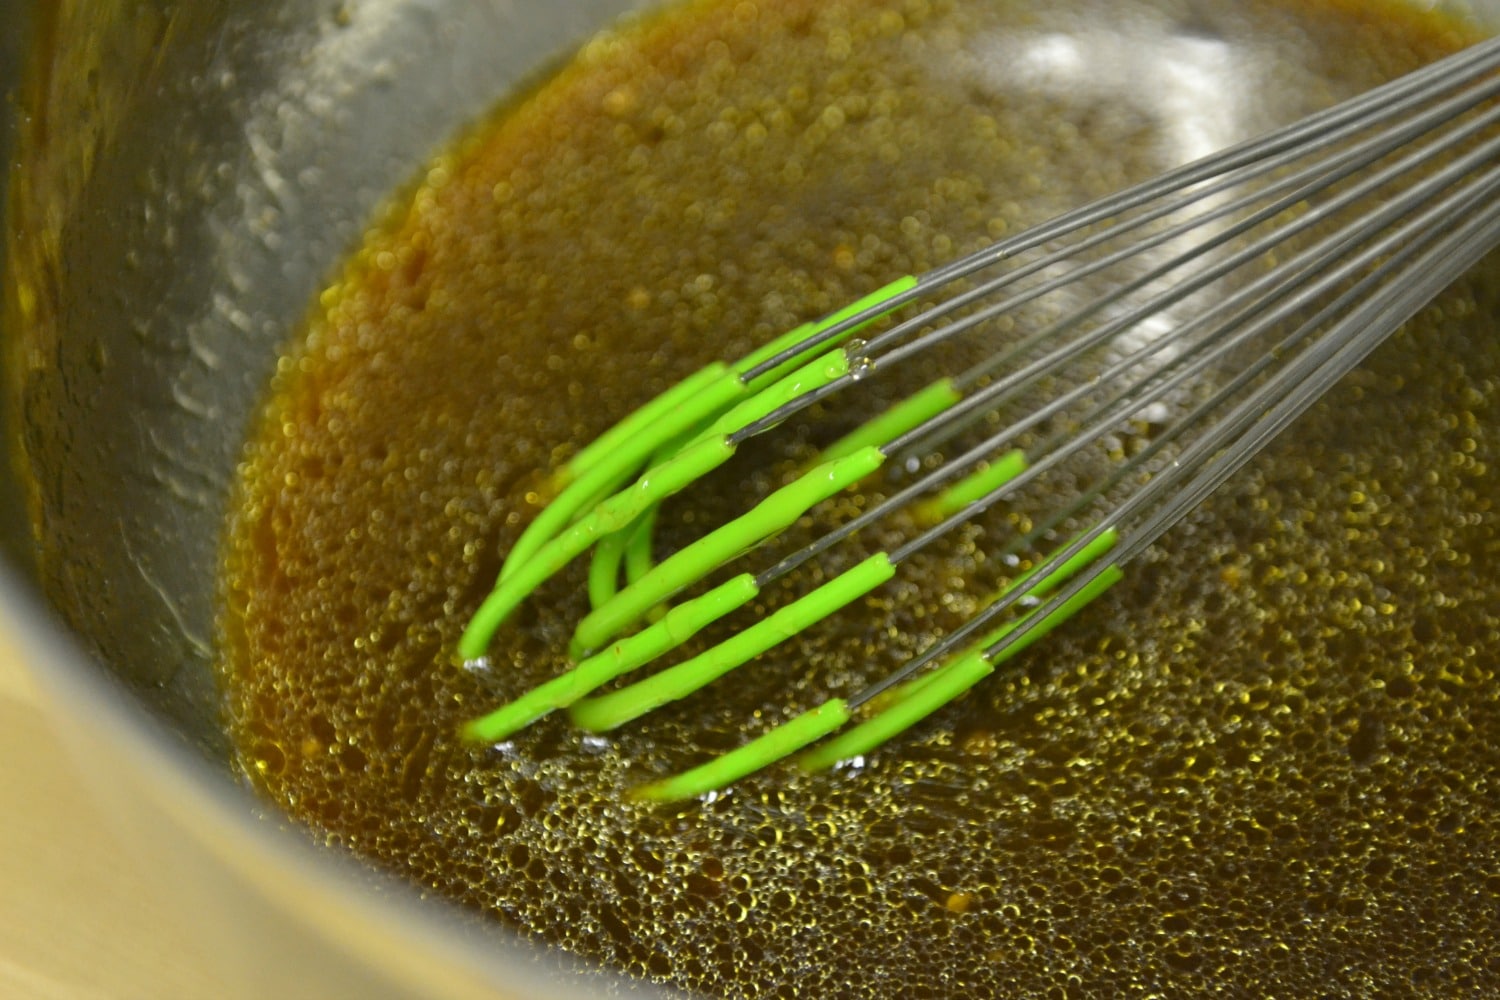 In large bowl whisk together olive oil, chicken broth, soy sauce, minced garlic, honey and Sriracha.